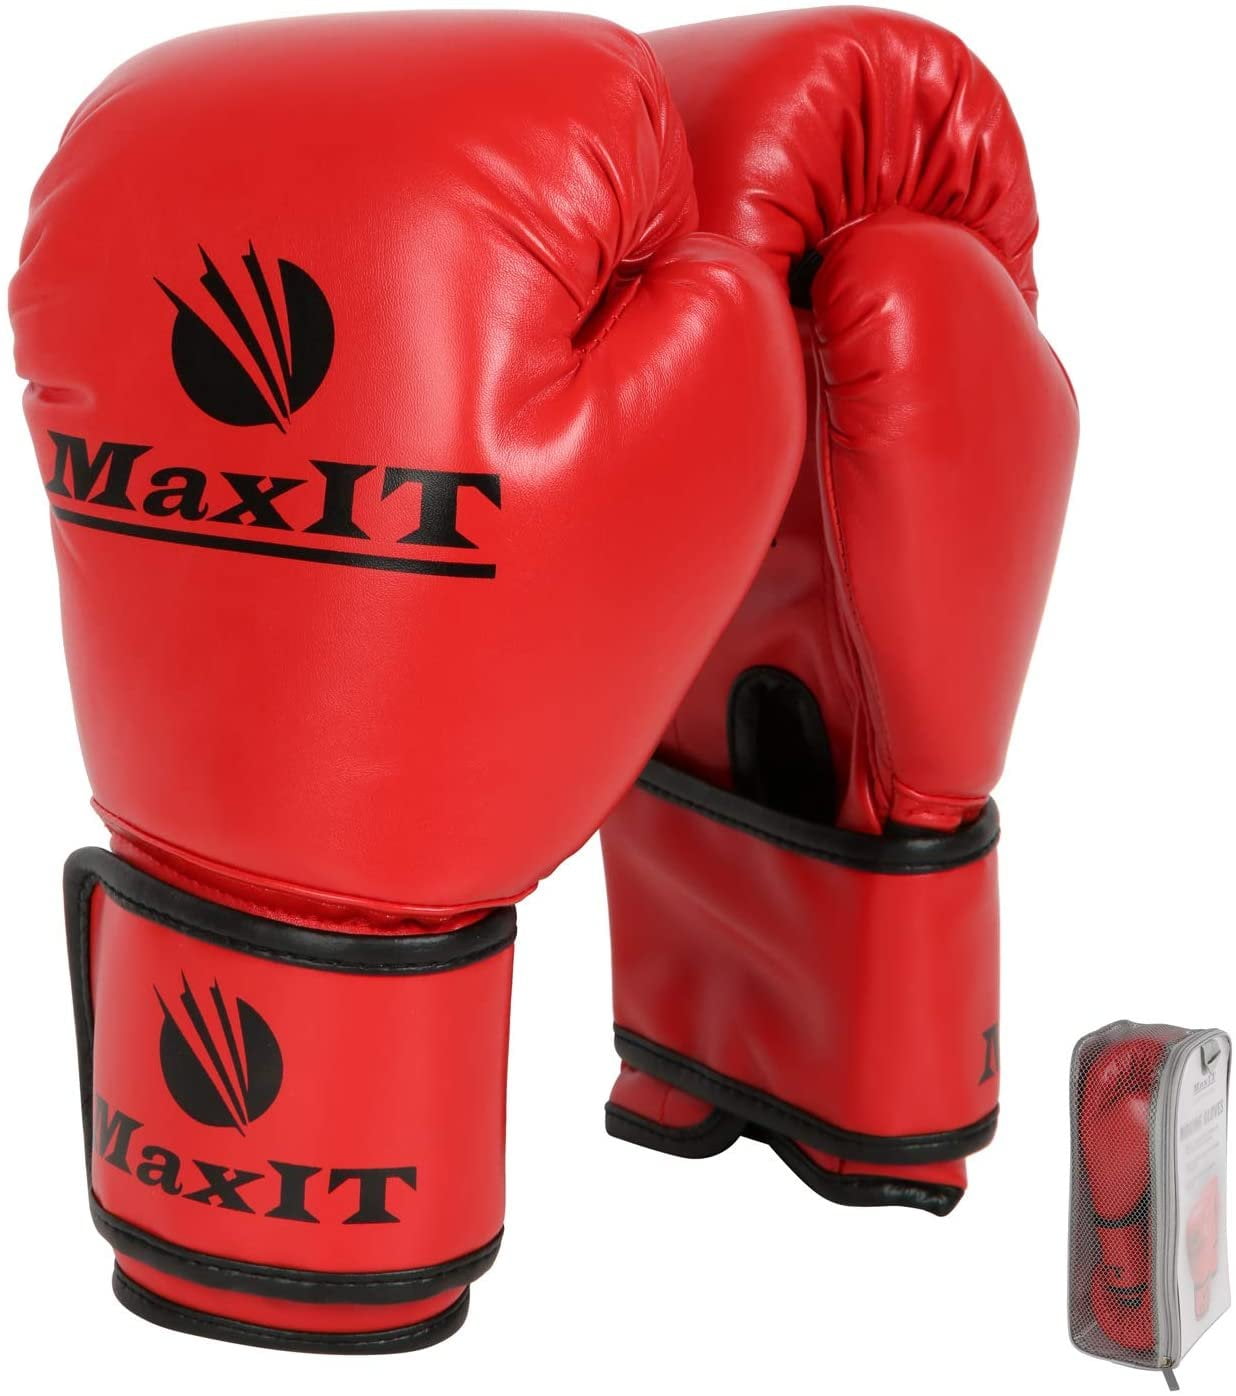 Hand Glove Set for MMA Fighting Sports Punching Bag Kickboxing Muay Thai Training Boxing MaxIT Pro Style Boxing Gloves Sparring Padded Odor-Free for Men or Women 